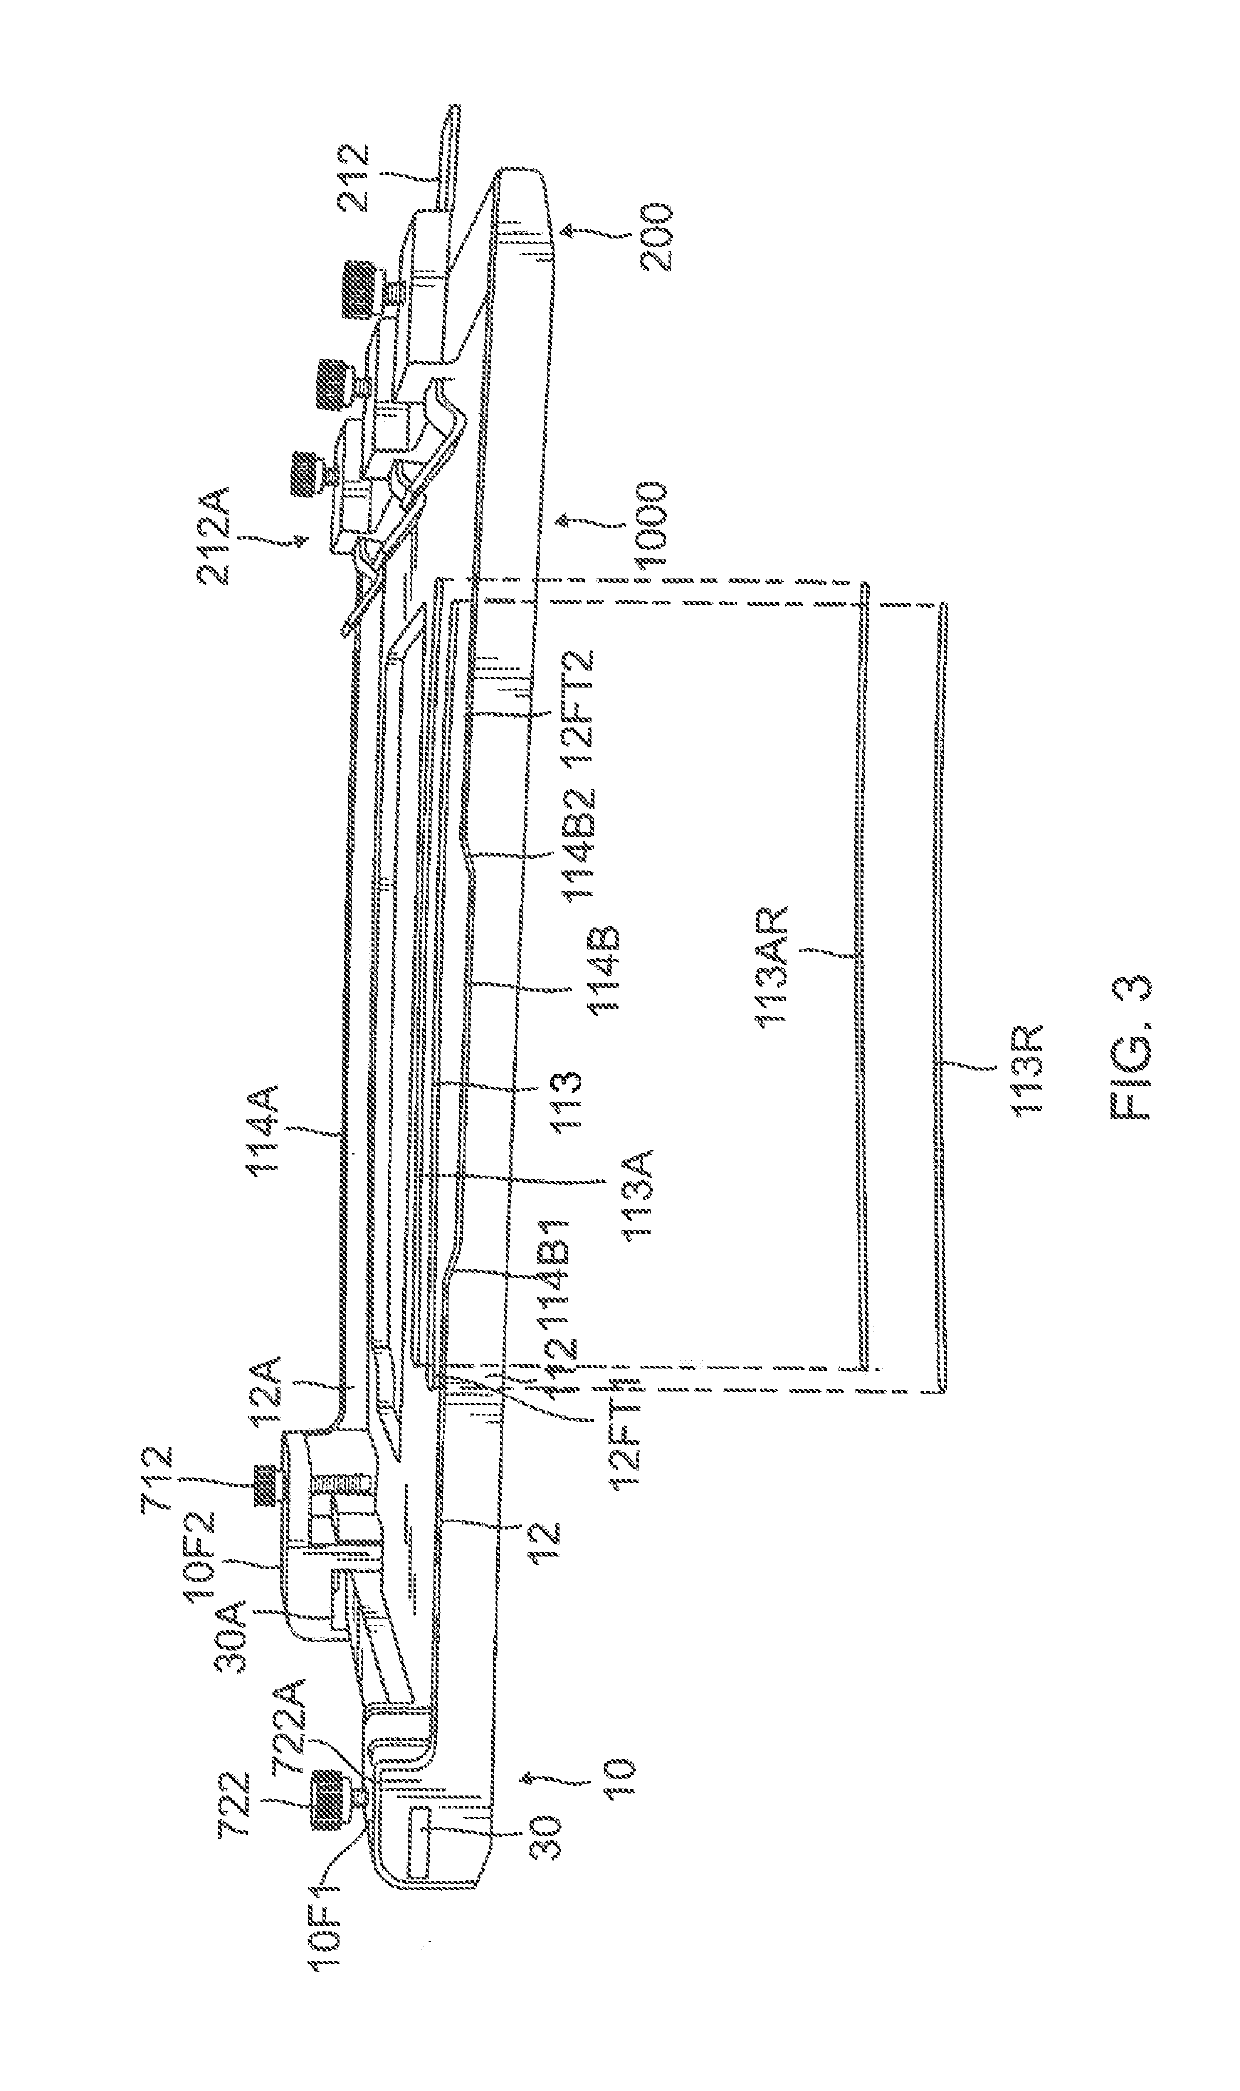 Rolling plate assembly attachment for portable power cutting tools including an improved structural design, improved  wheel configuration, and a cutting guide